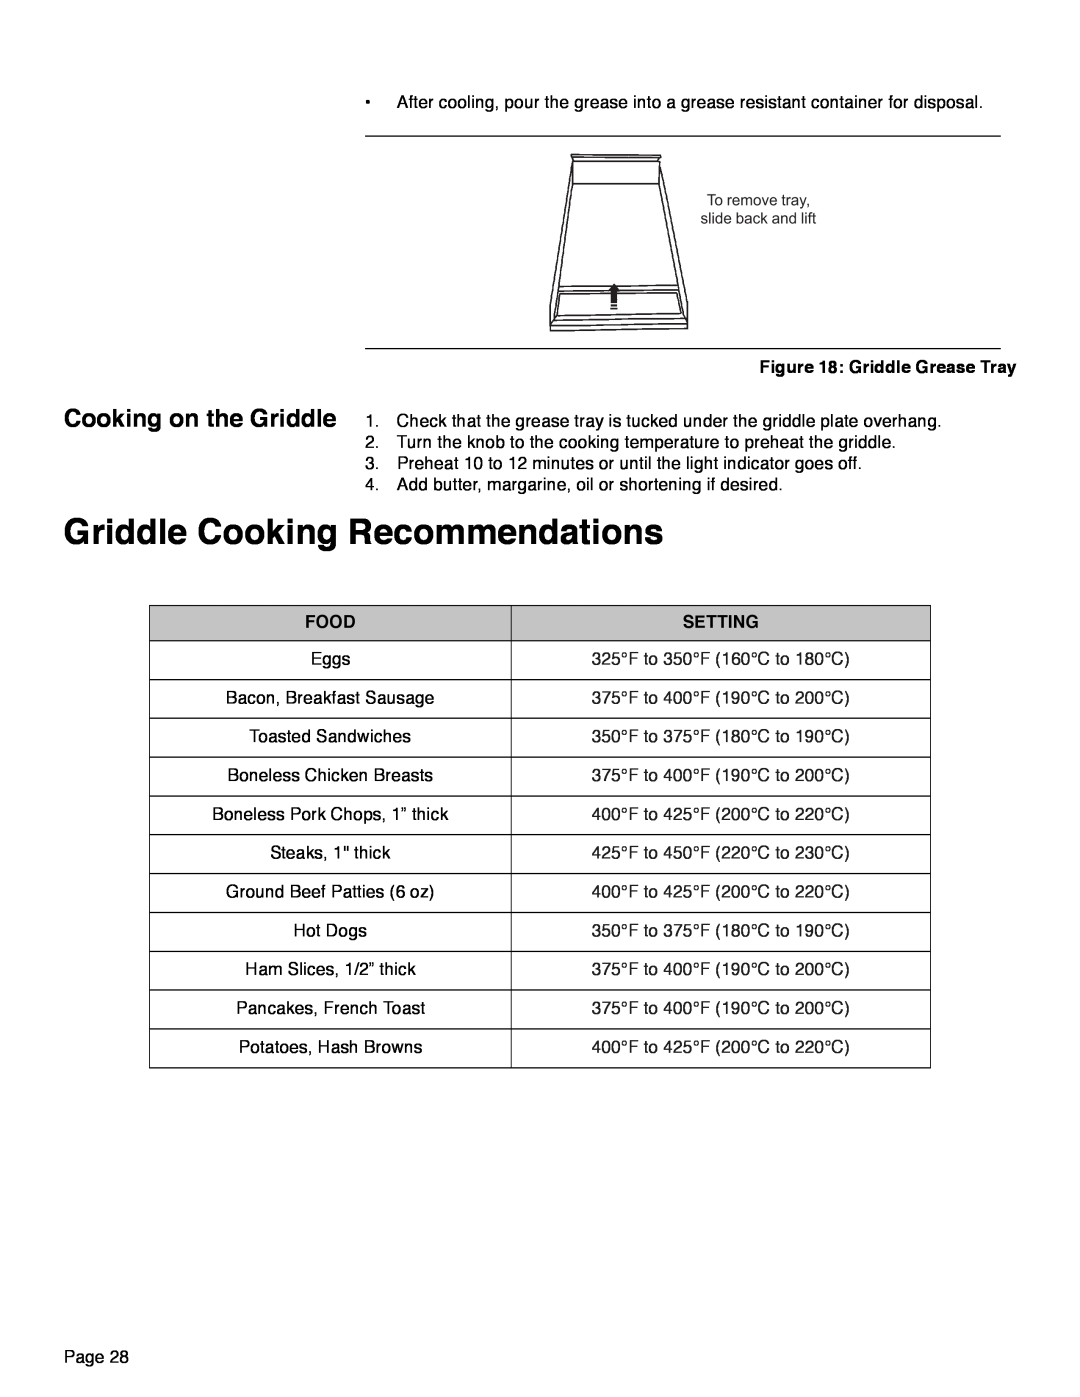 Thermador PRD36, PRD48, PRD30 manual Griddle Cooking Recommendations, Griddle Grease Tray, Food, Setting 